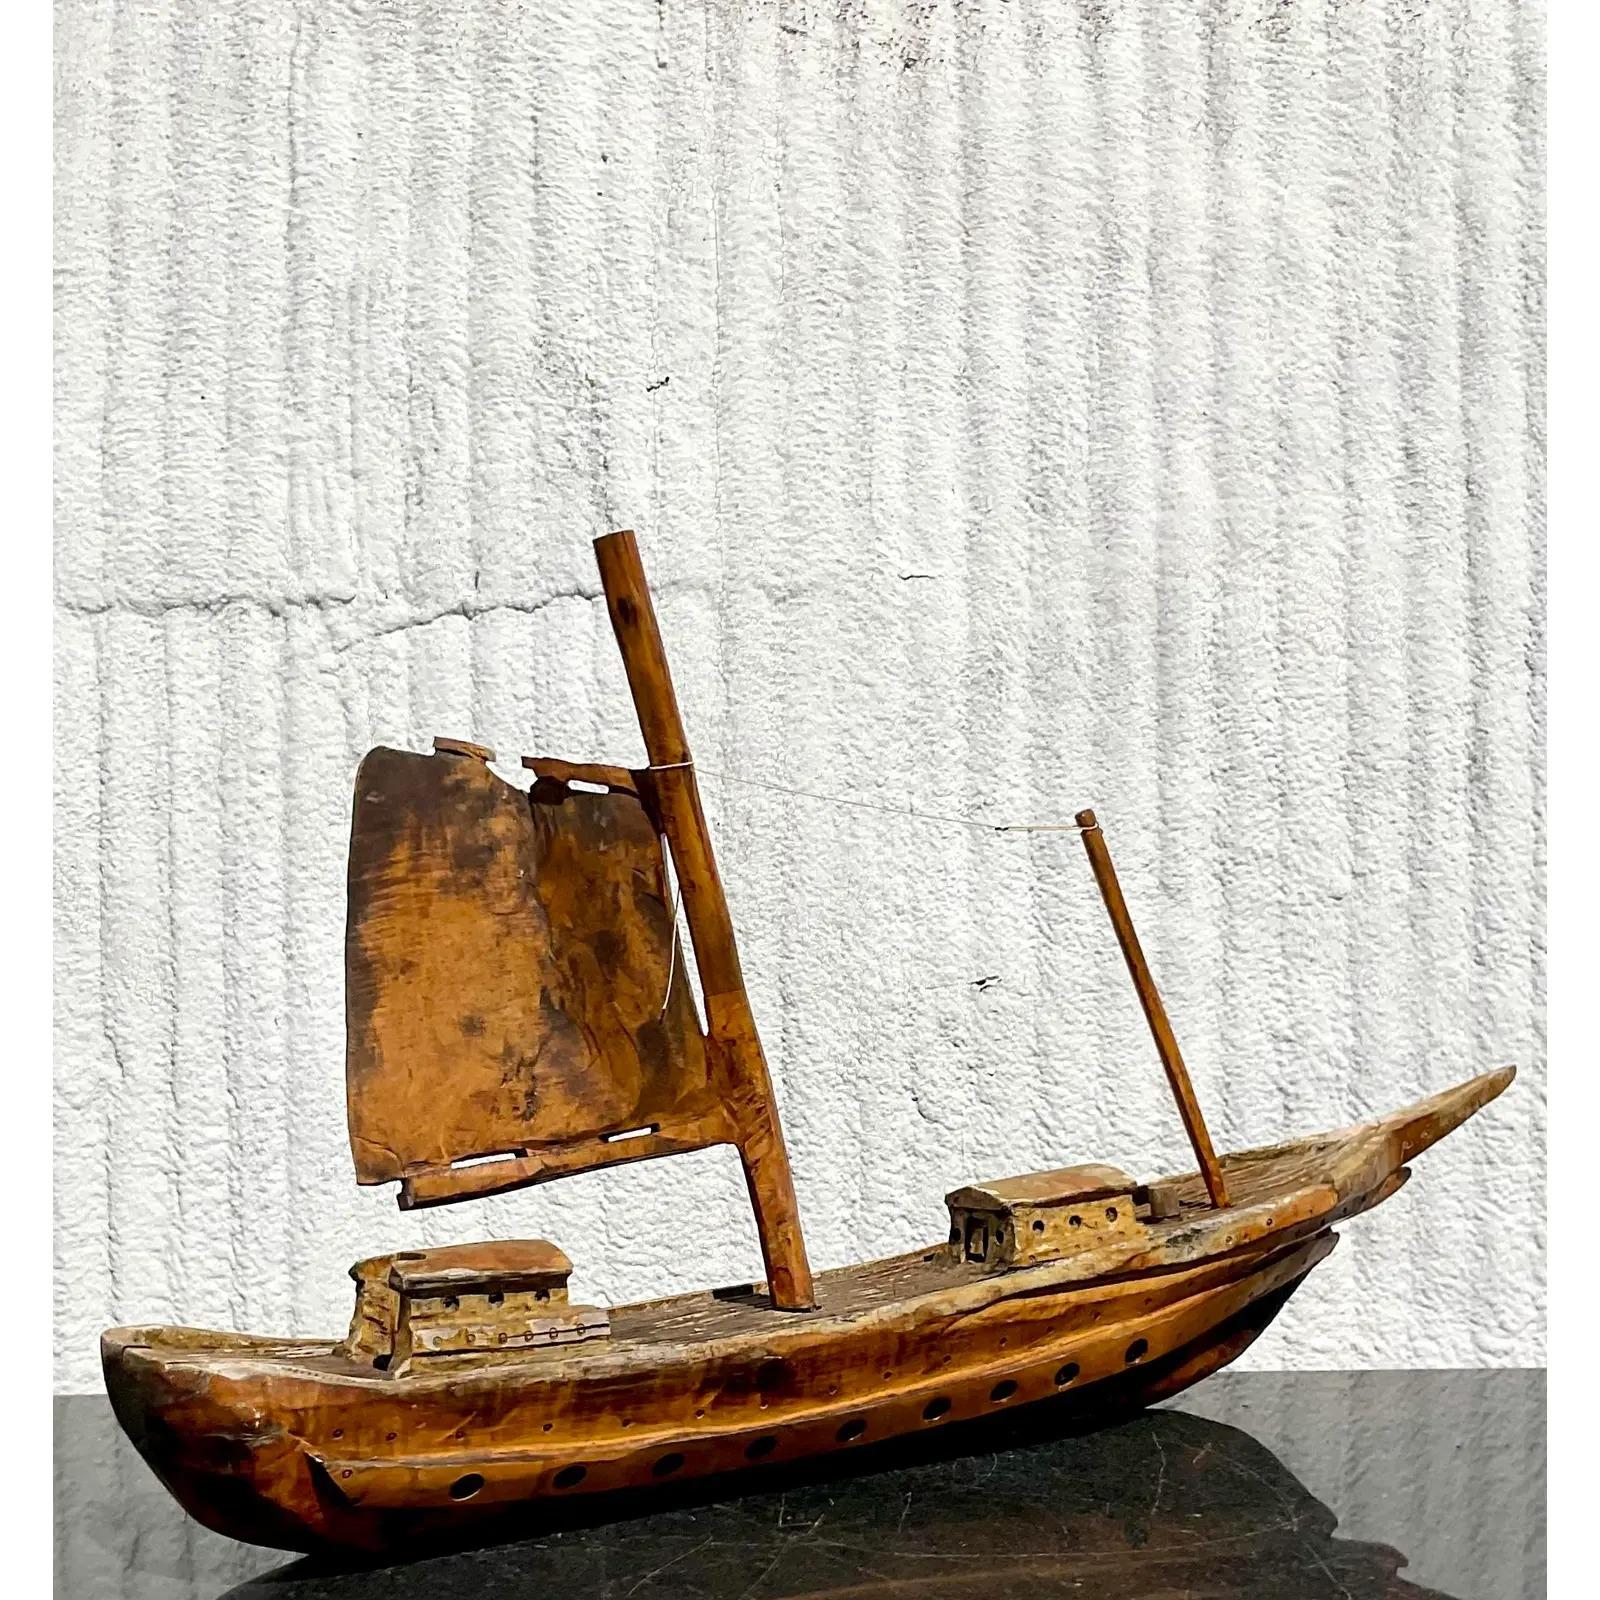 A stunning vintage wooden ship model that can be a great piece to display. Acquired at a Palm Beach estate.